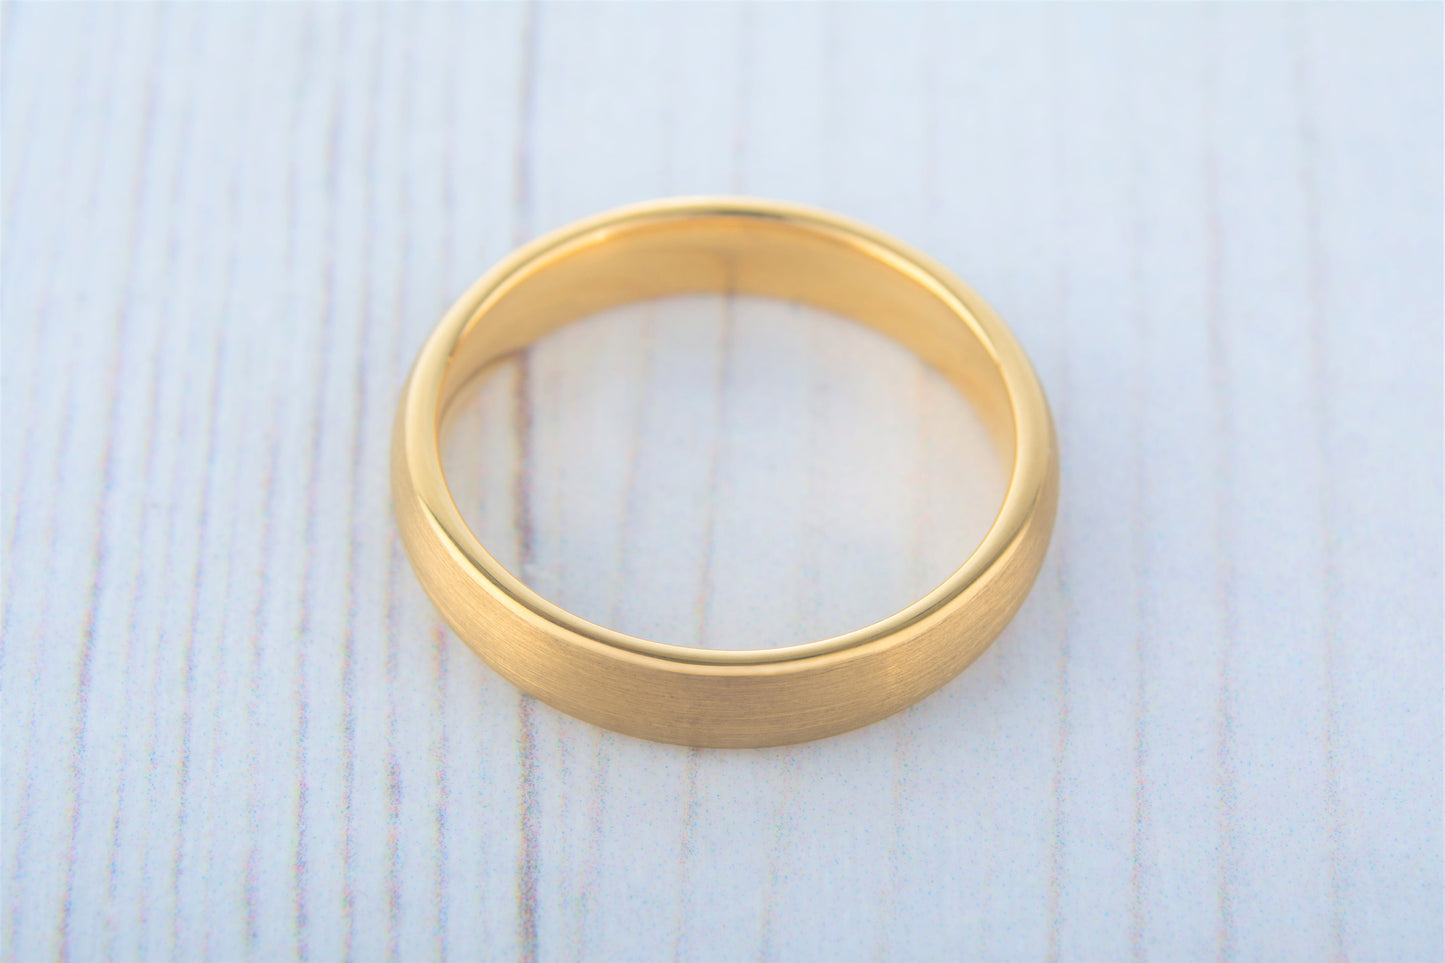 3mm 18K Yellow Gold & Titanium brushed Wedding ring band for men and women